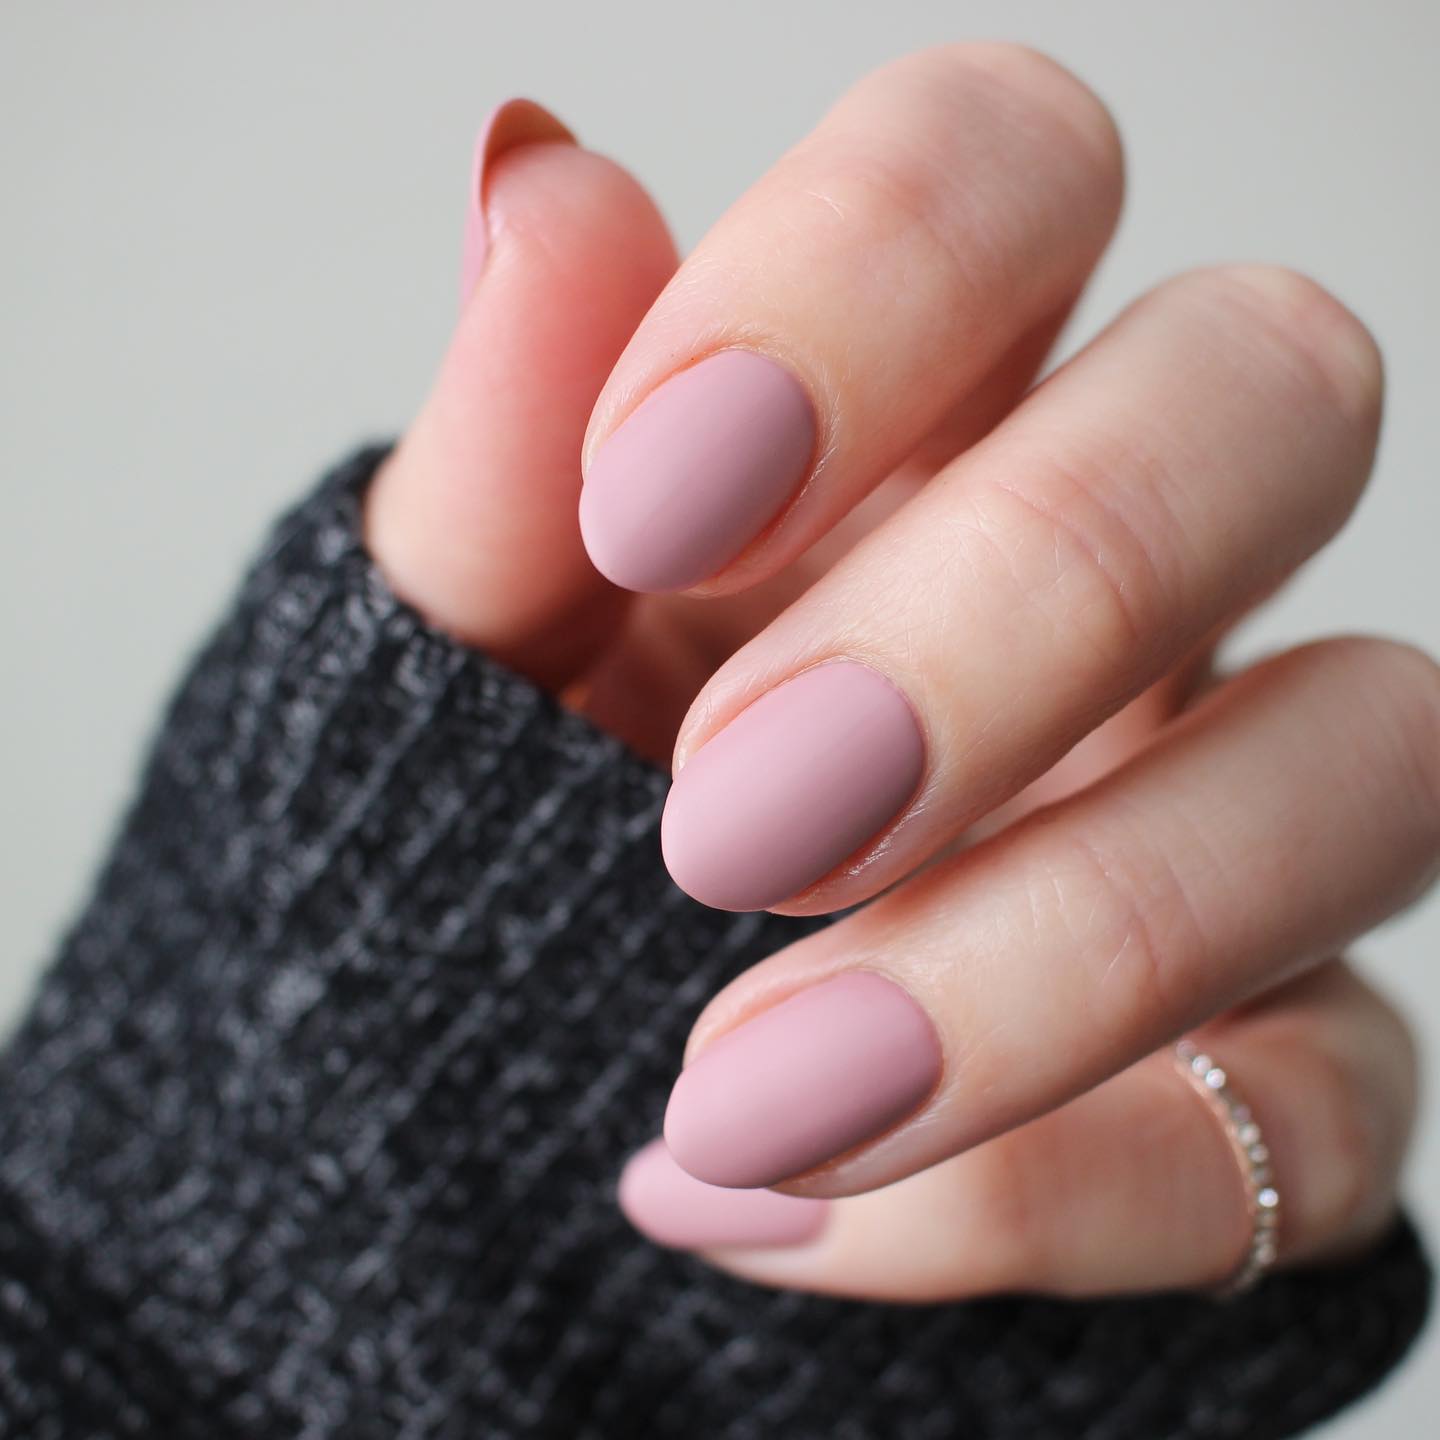 Short Plain Baby Pink Nails Pictures Photos and Images for Facebook  Tumblr Pinterest and Twitter